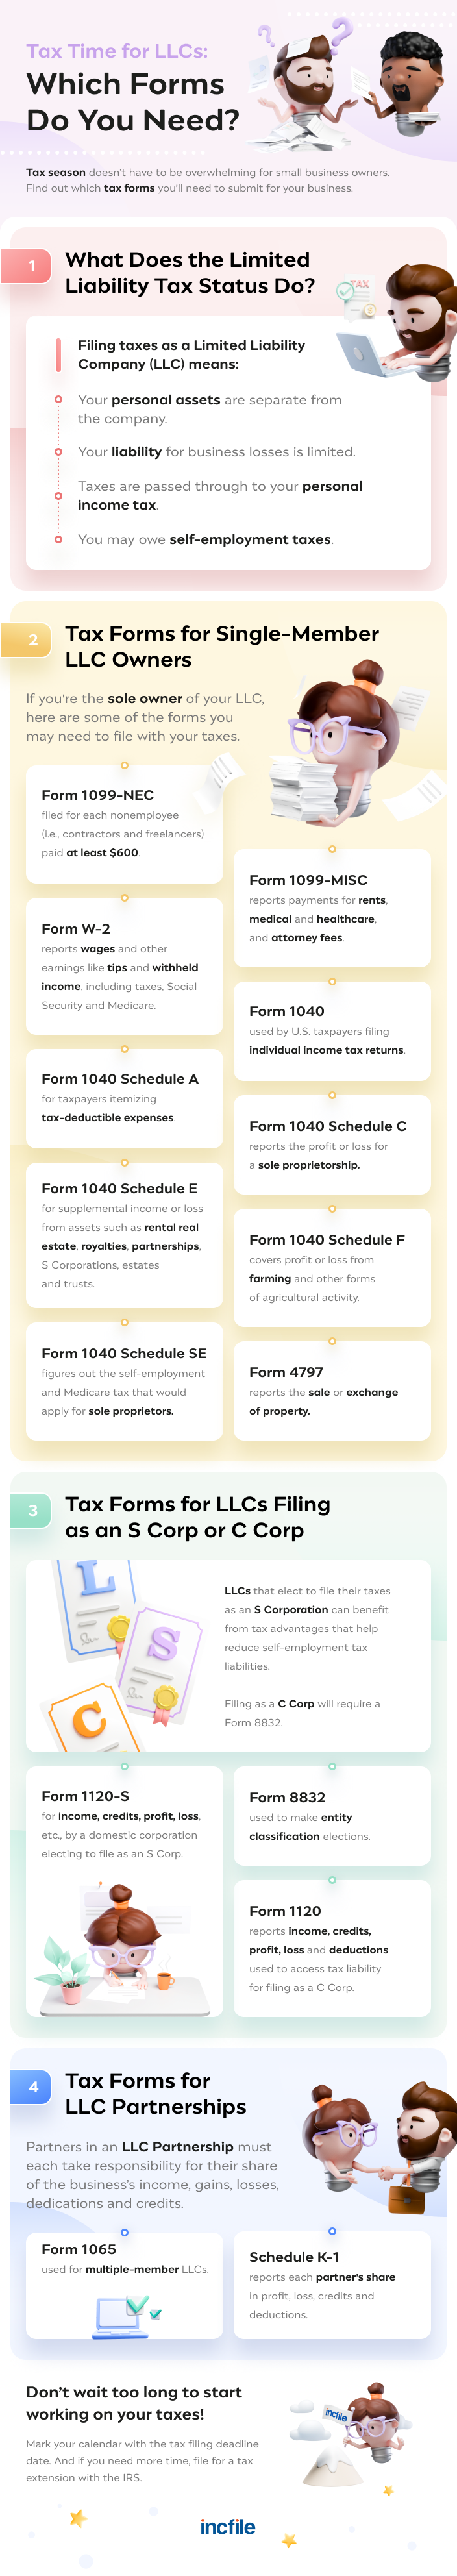 tax forms needed for llc business